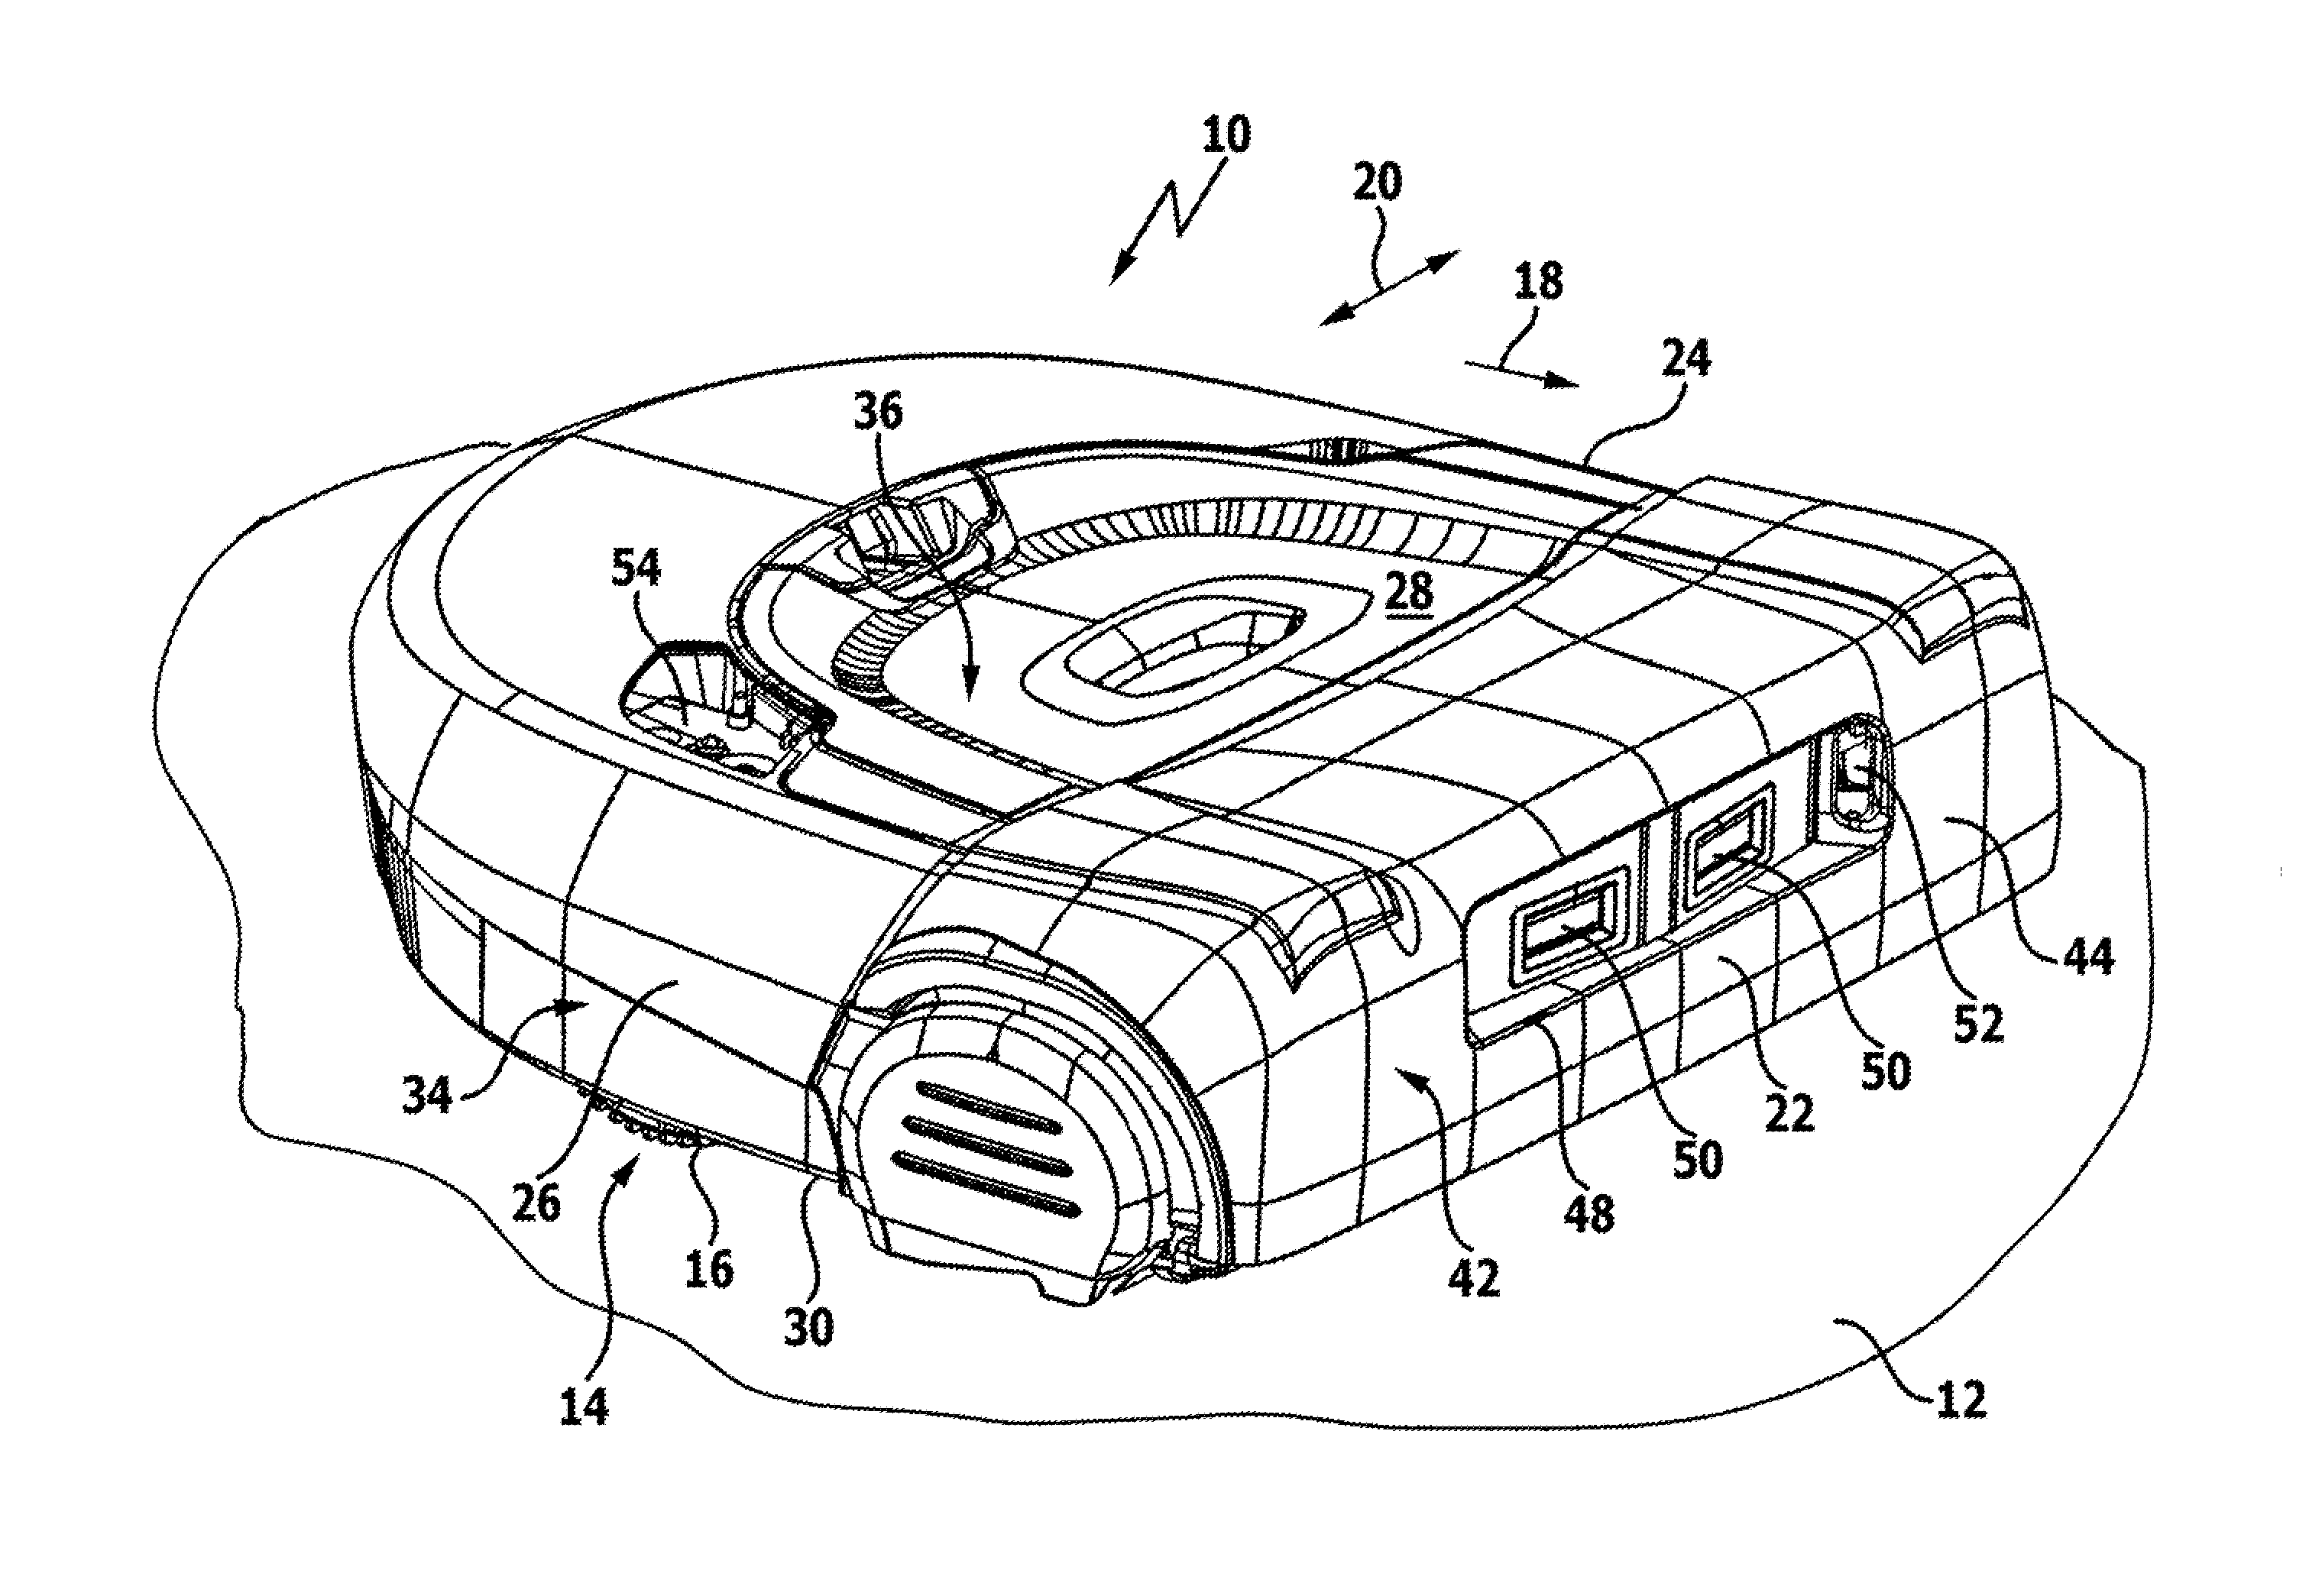 Self-propelled and self-steering floor cleaning appliance